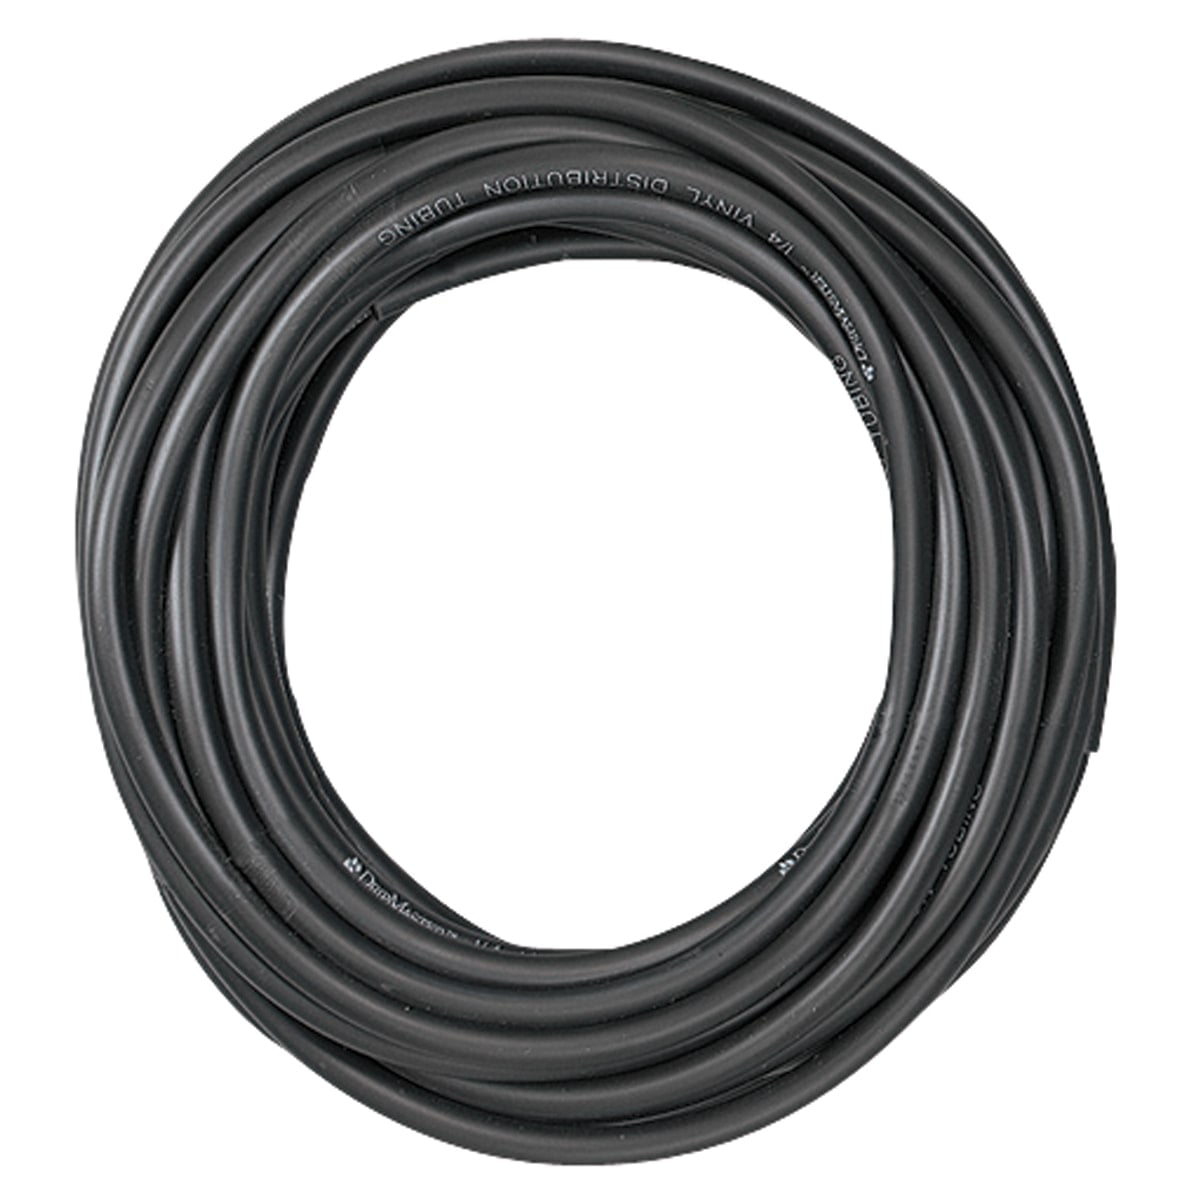 5/8-inch x 50-inch NDS 061005P 5/8 X50 Drip Water Hose 